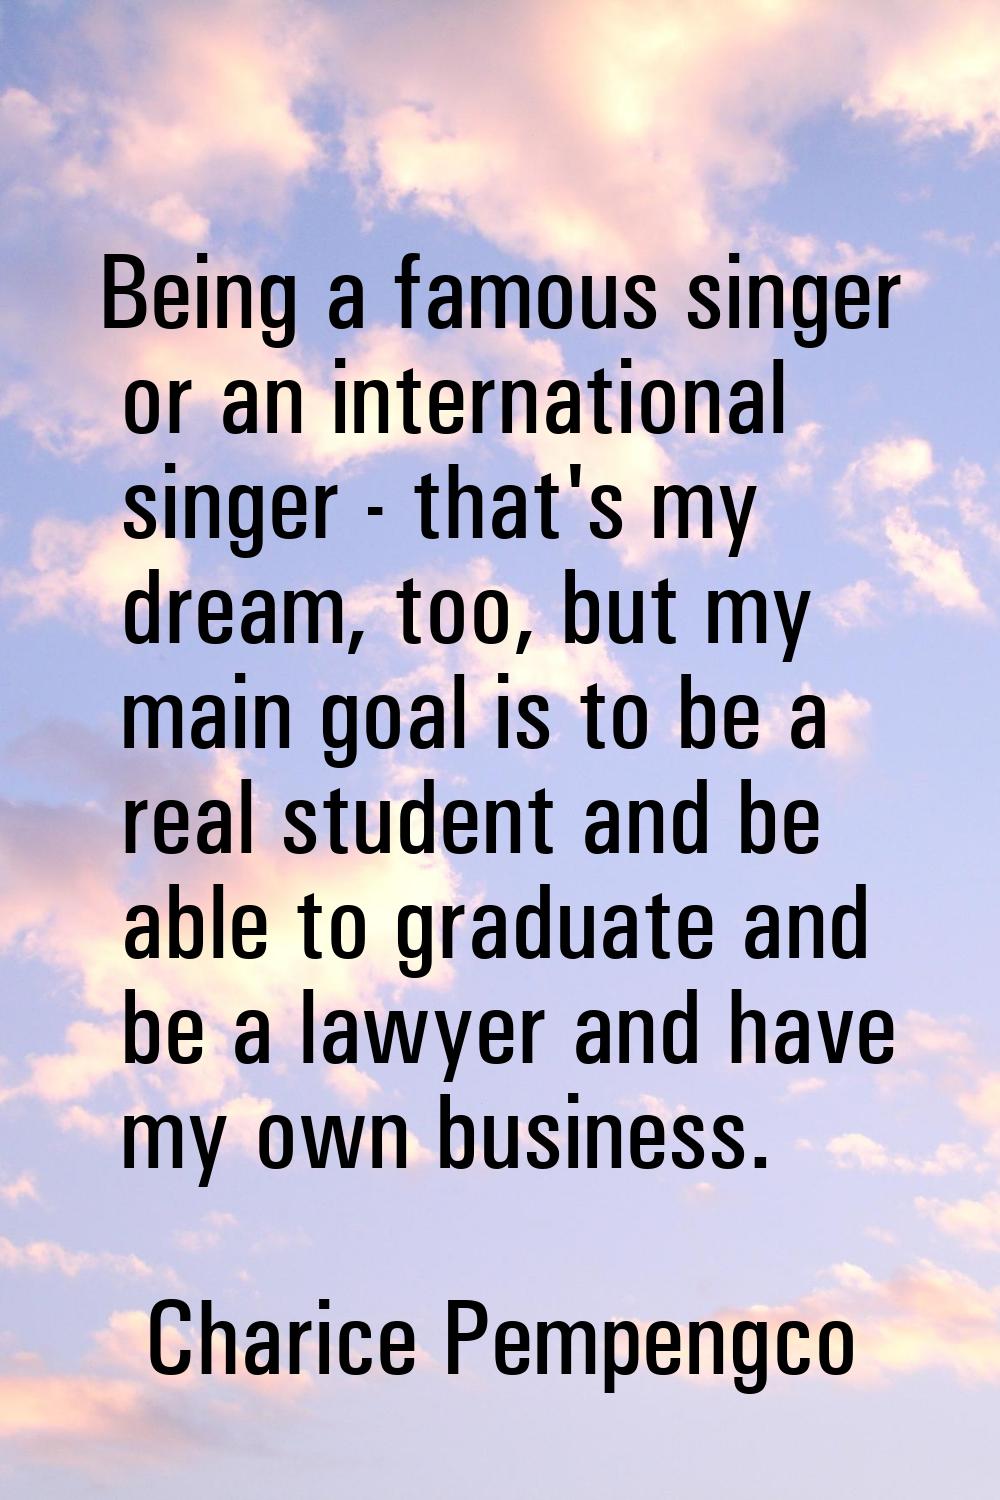 Being a famous singer or an international singer - that's my dream, too, but my main goal is to be 